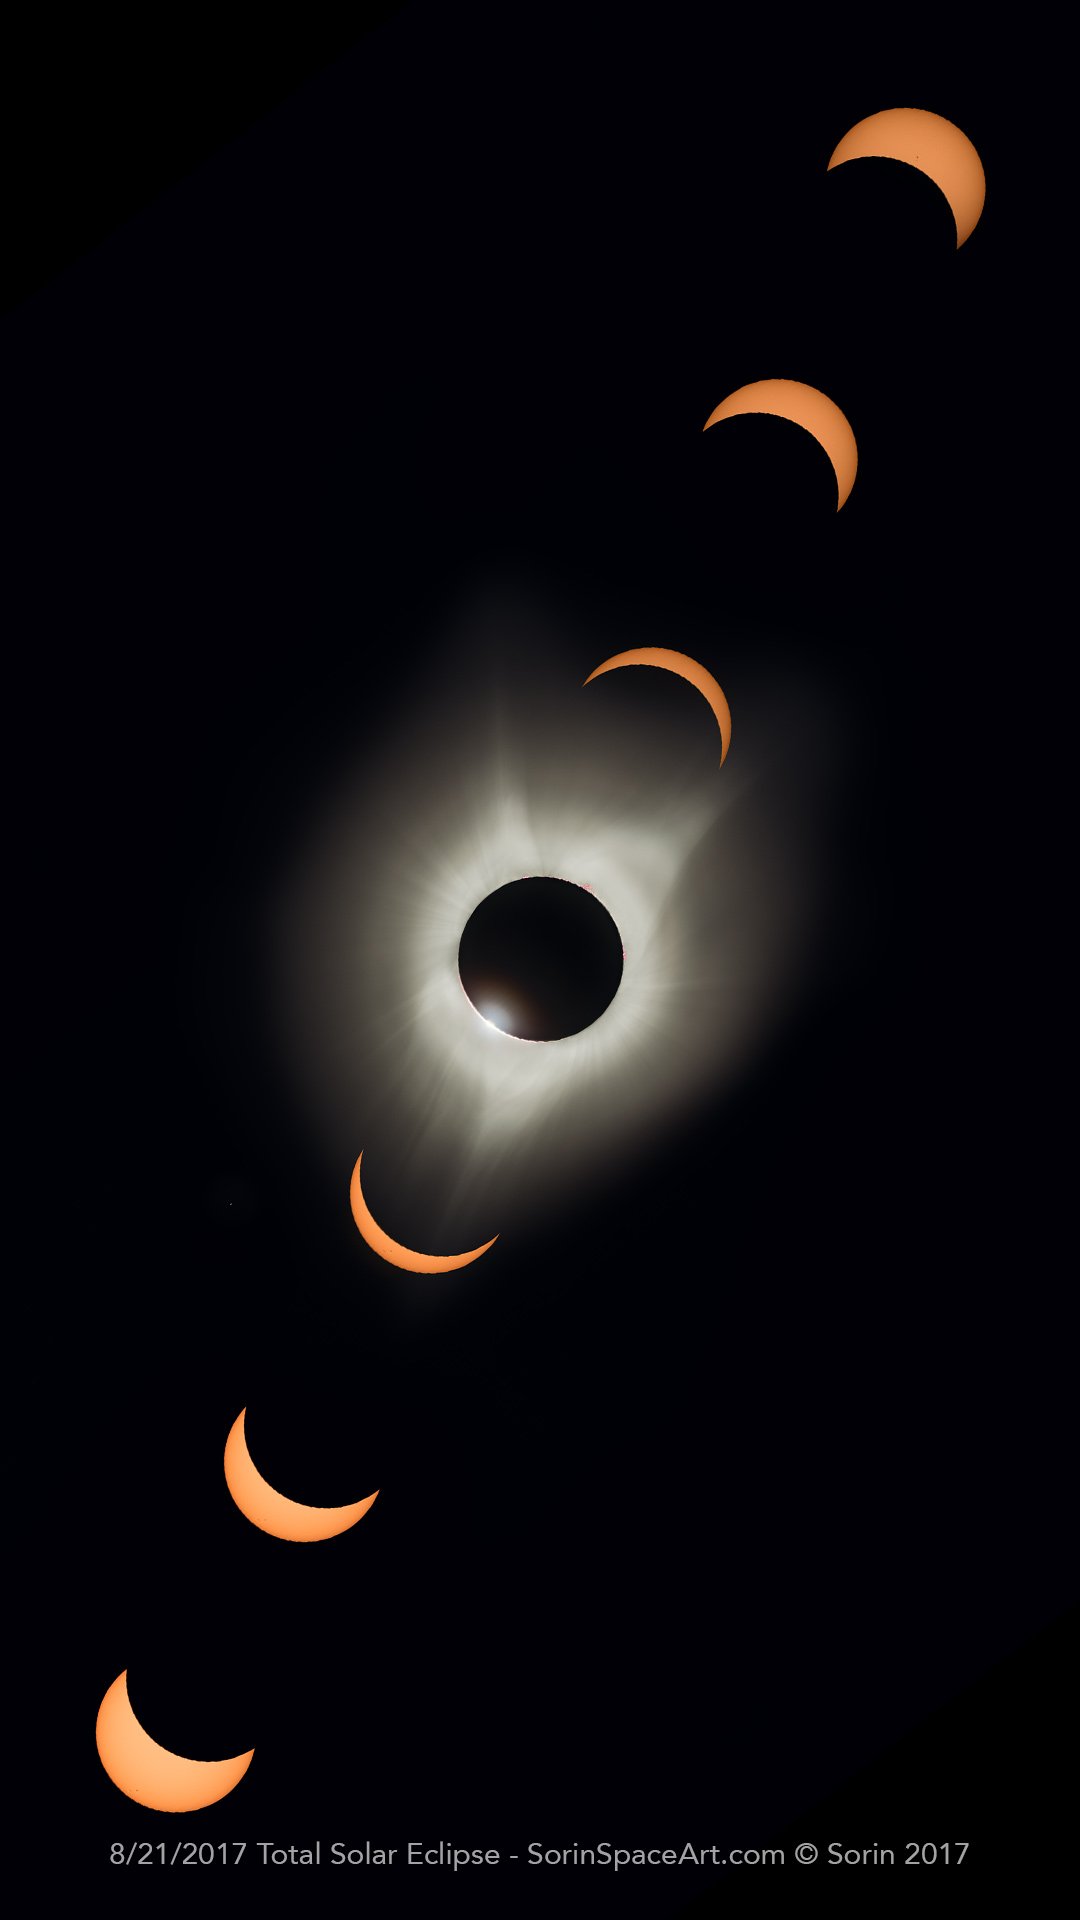 Eclipse Wallpaper For iPhone Mile High Astronomy